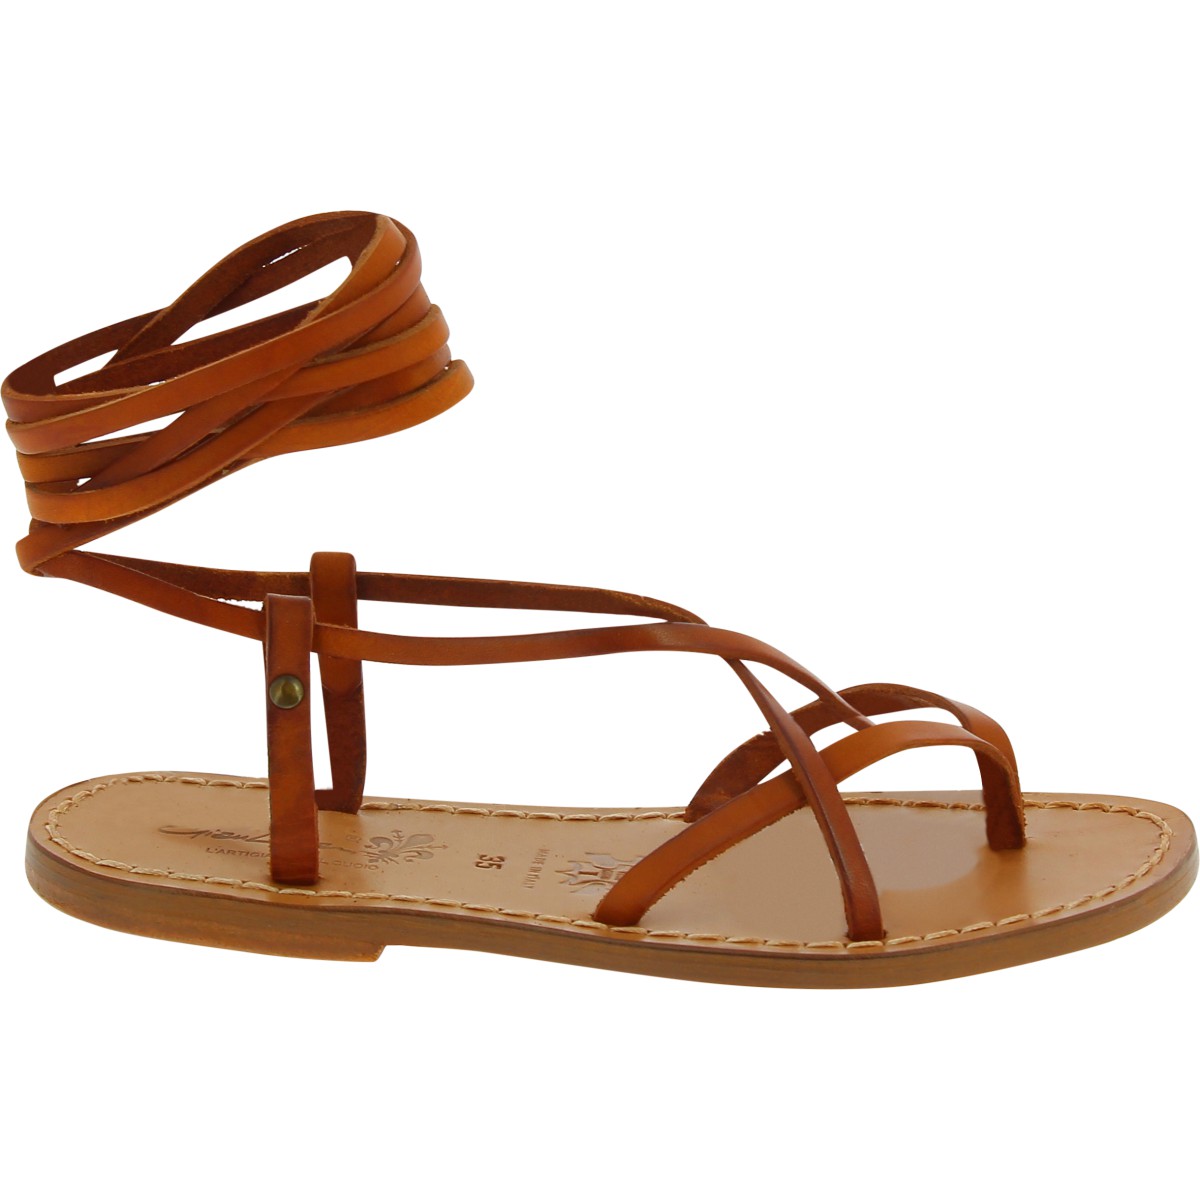 P.B.H. CAMEL SANDALS ::PARMAR BOOT HOUSE | Buy Footwear and Accessories For  Men, Women & Kids